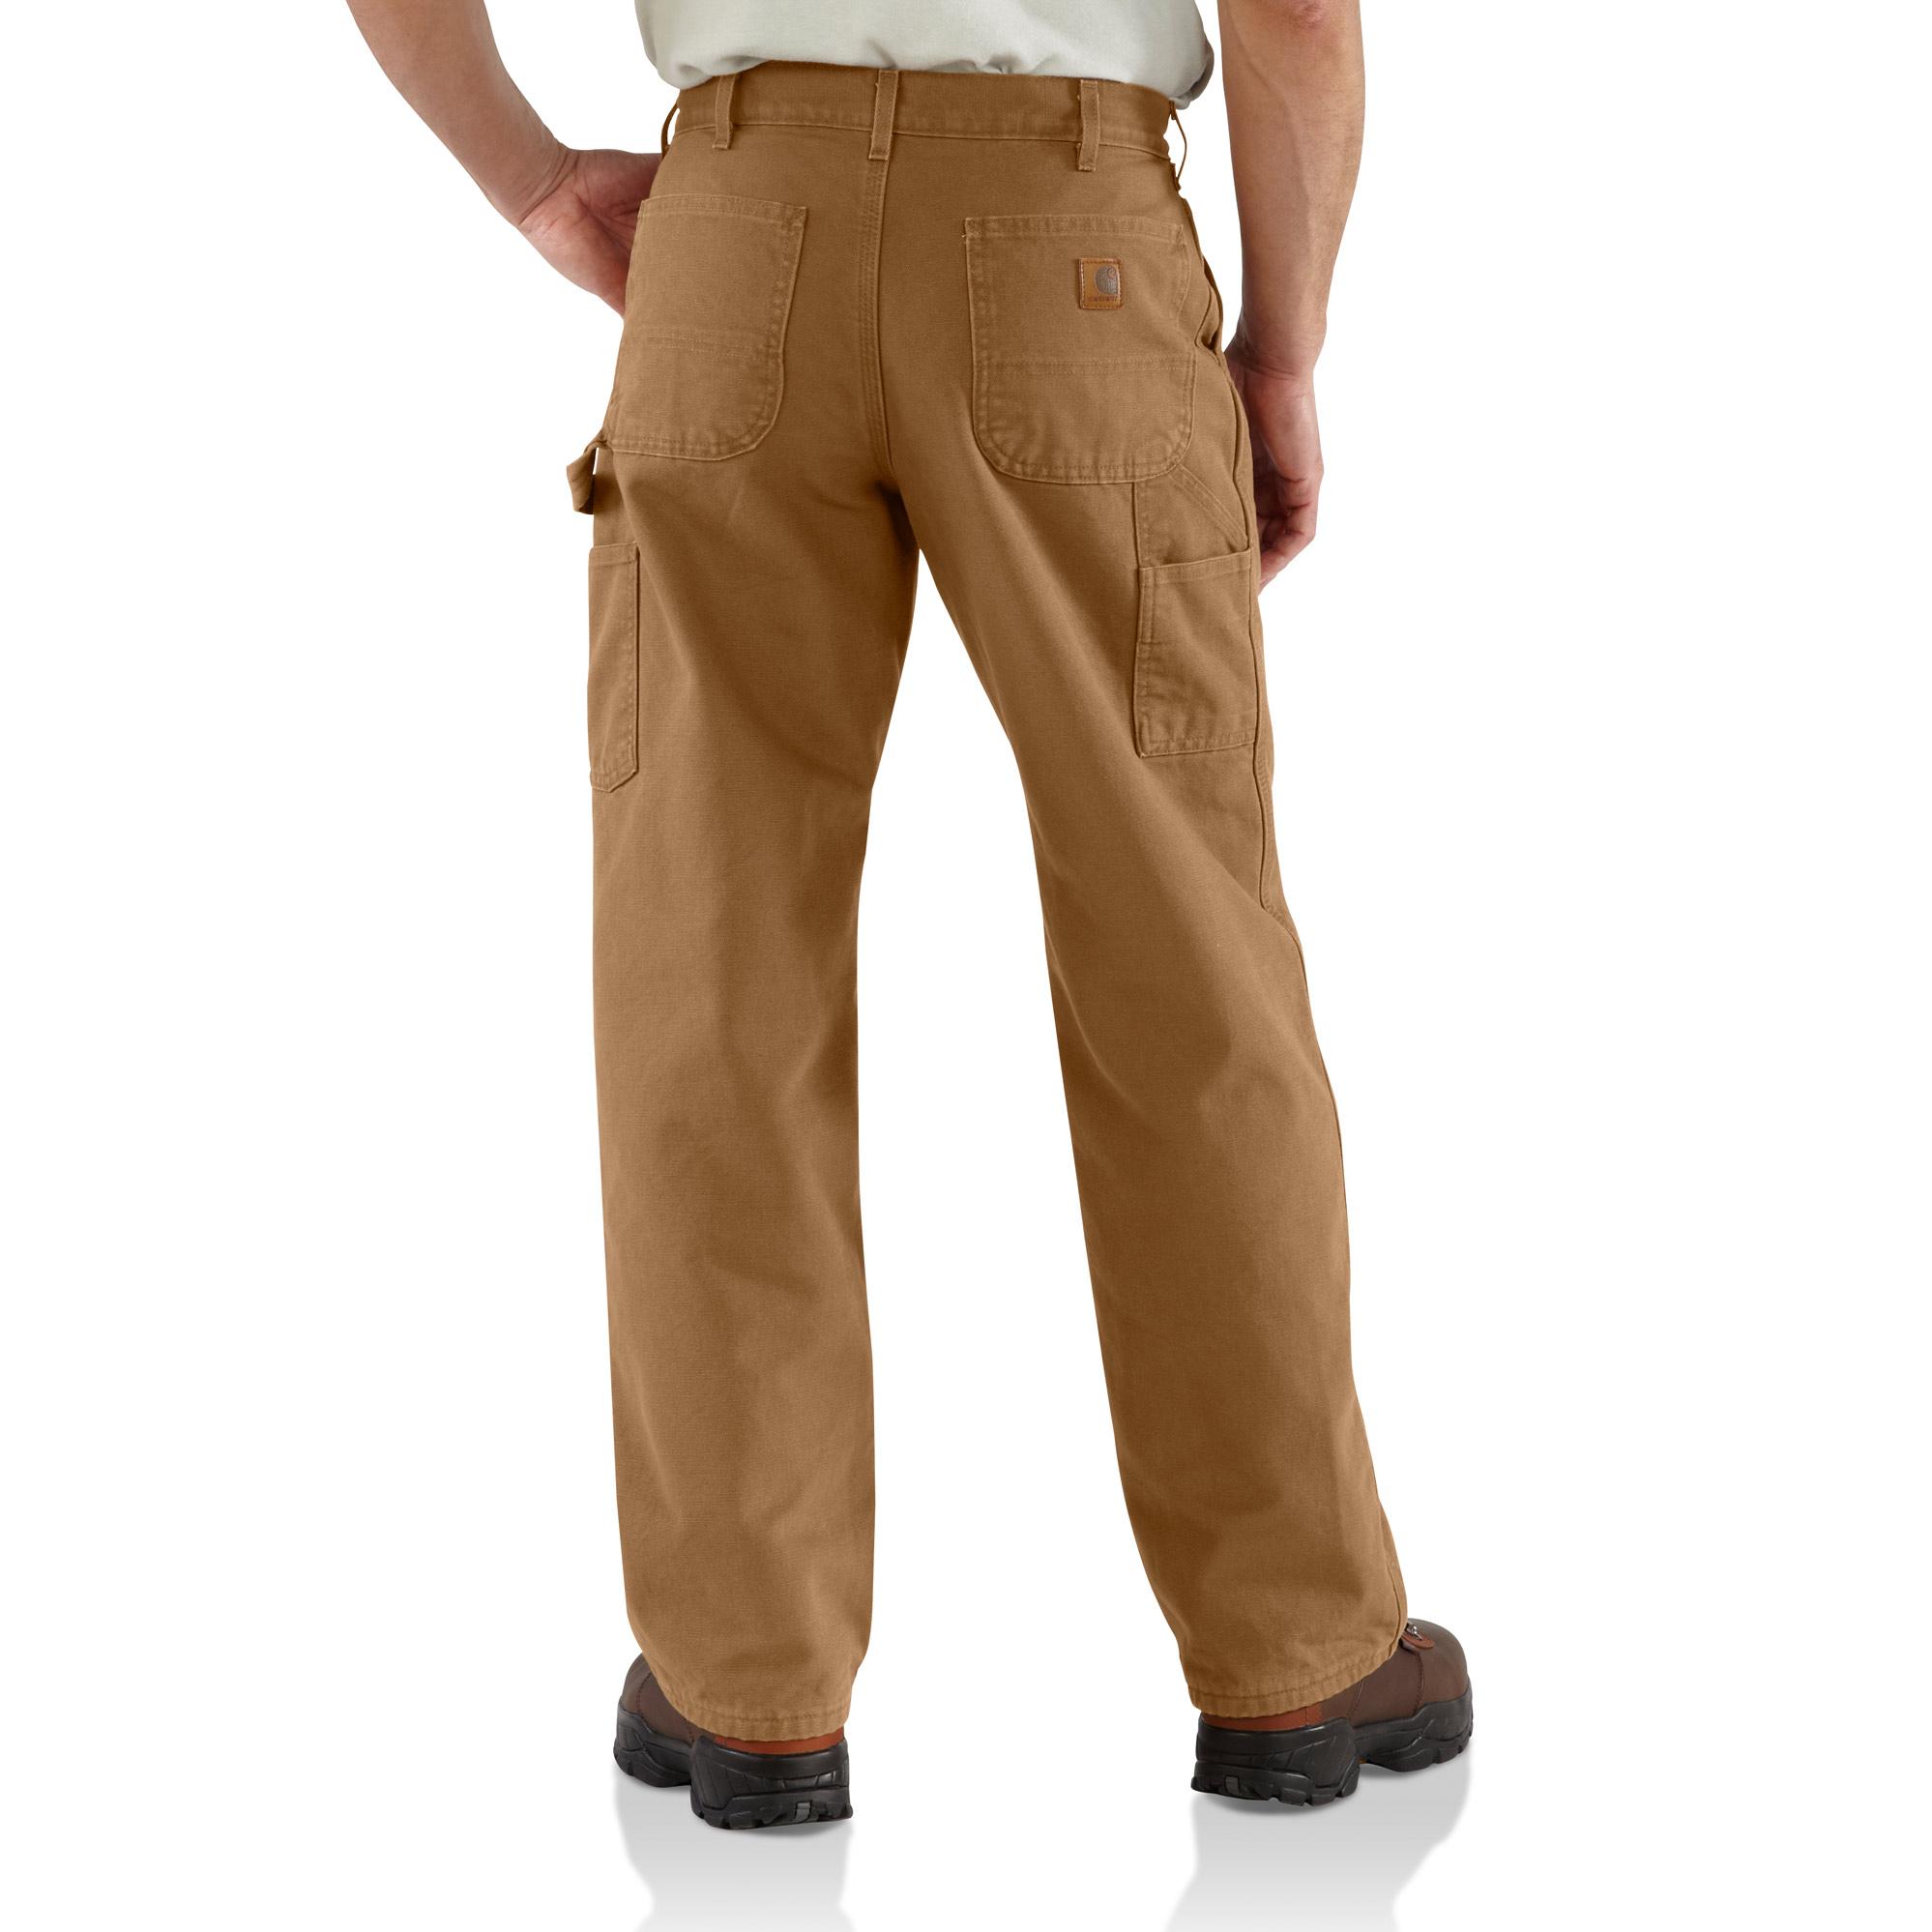 Carhartt Men's Washed Duck Work Loose Fit Pant Traditions, 40% OFF